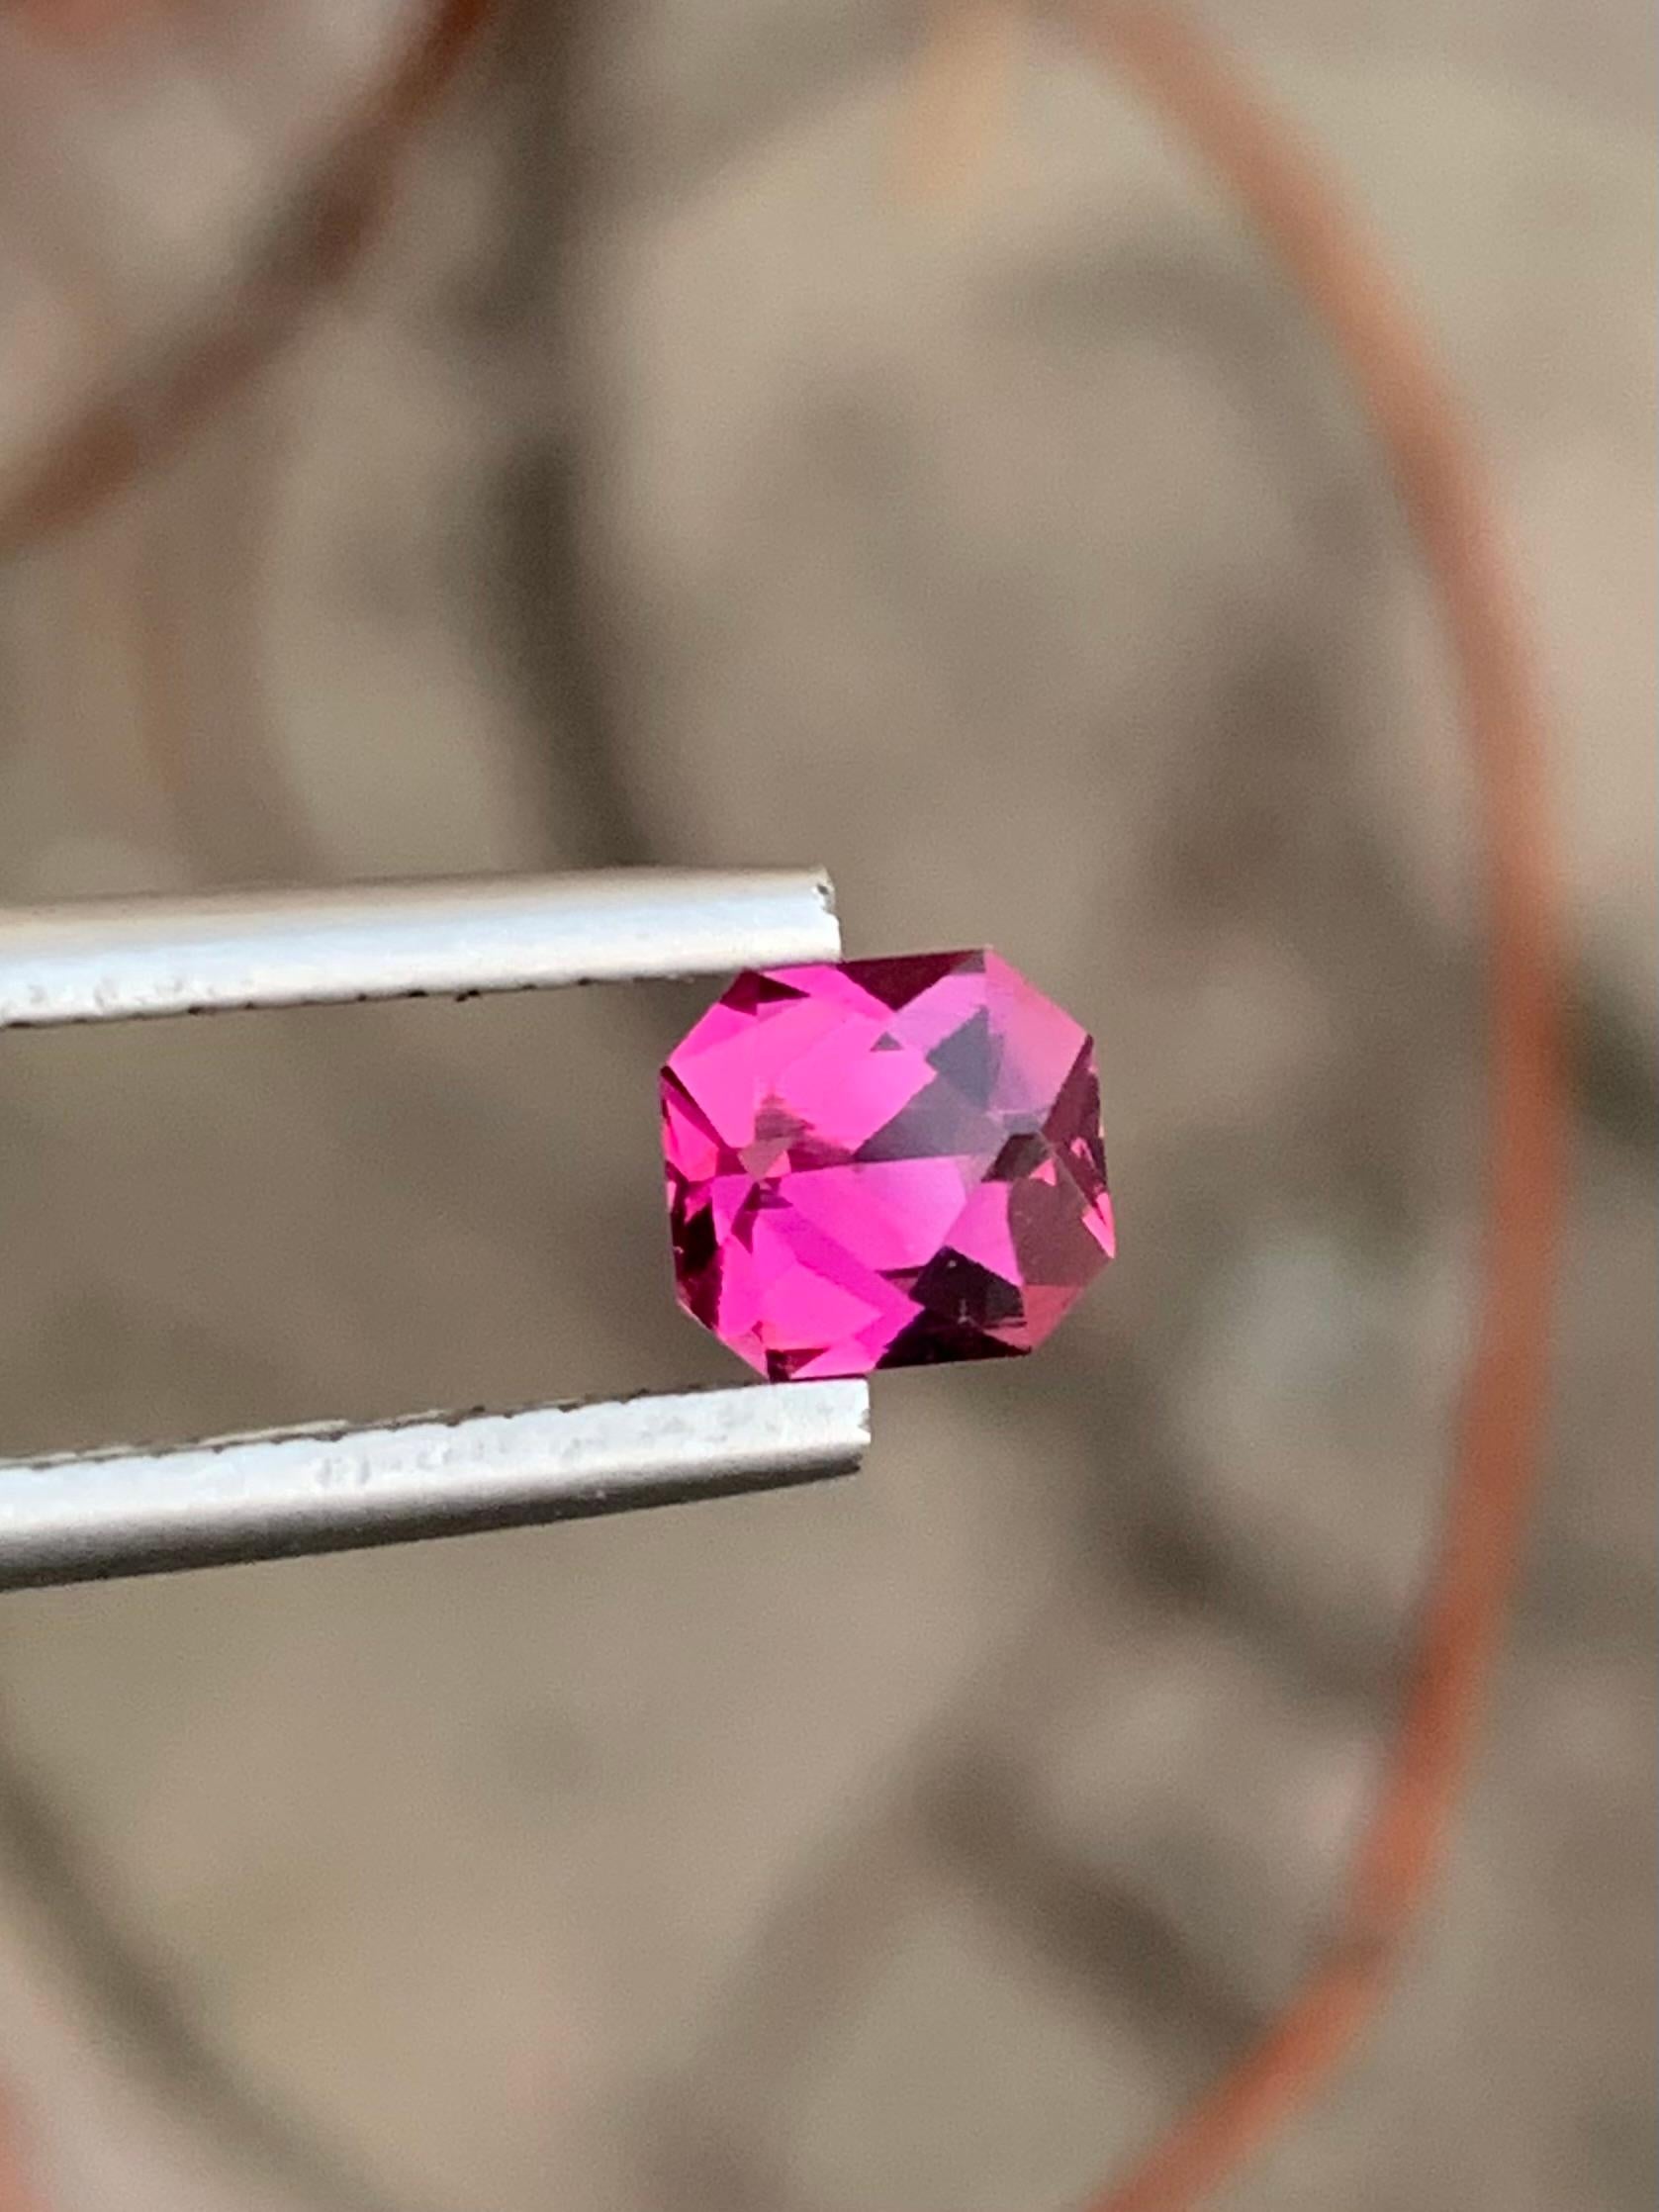 Loose Garnet
Weight: 1 Carat 
Dimension: 5.9x5.5x3.4 Mm
Origin: Tanzania
Shape: Octagon 
Color: Purplish Pink
Treatment: Non
Rhodolite garnet is a striking and valuable gemstone that stands out for its alluring red-violet to purplish-red color. This